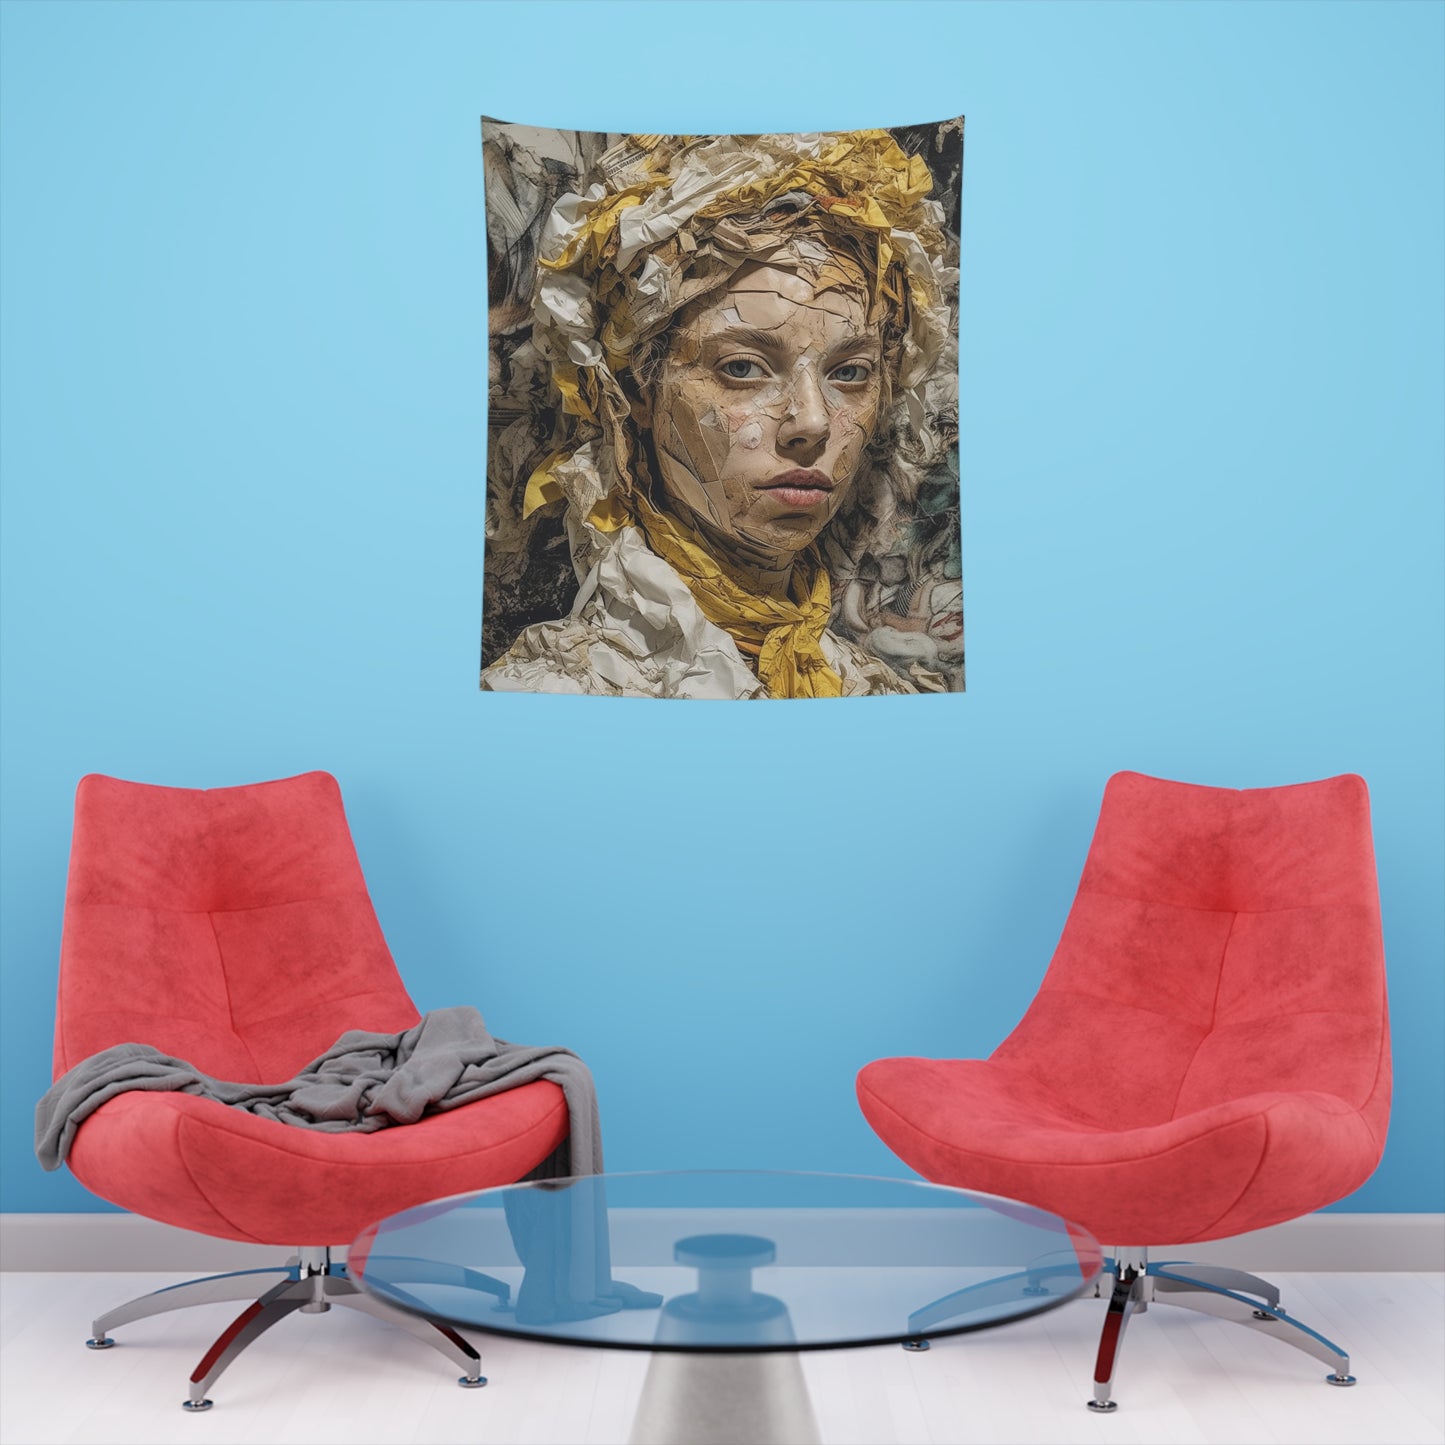 Woven Elegance: Printed Wall Tapestry with Mixed Media and Collage